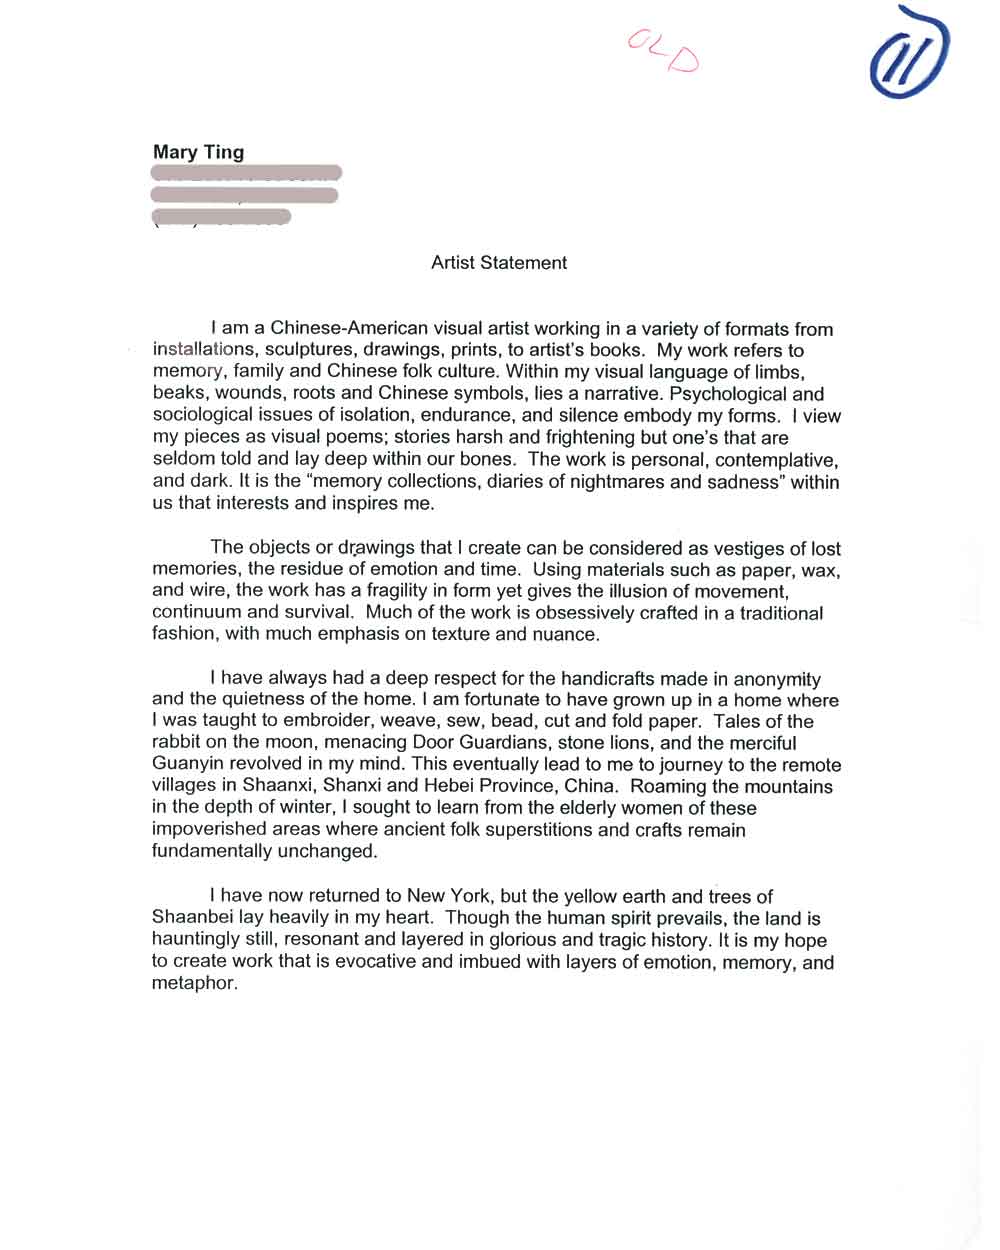 Mary Ting's Artist Statement, pg 1